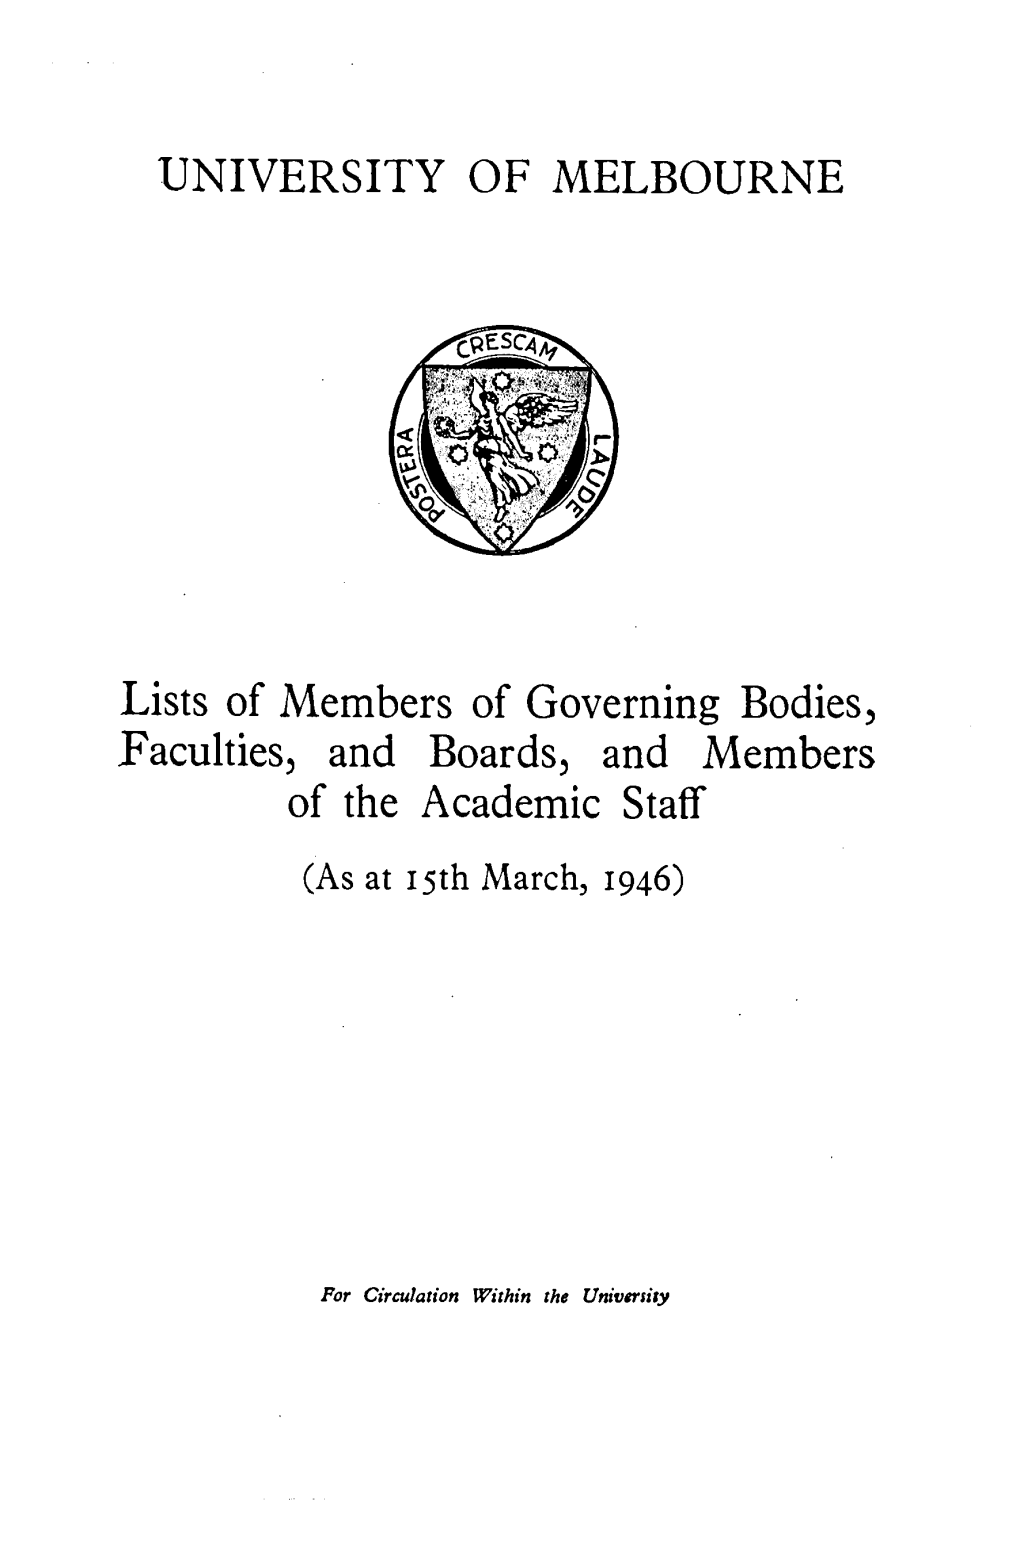 UNIVERSITY of MELBOURNE Lists of Members of Governing Bodies, Faculties, and Boards, and Members of the Academic Staff